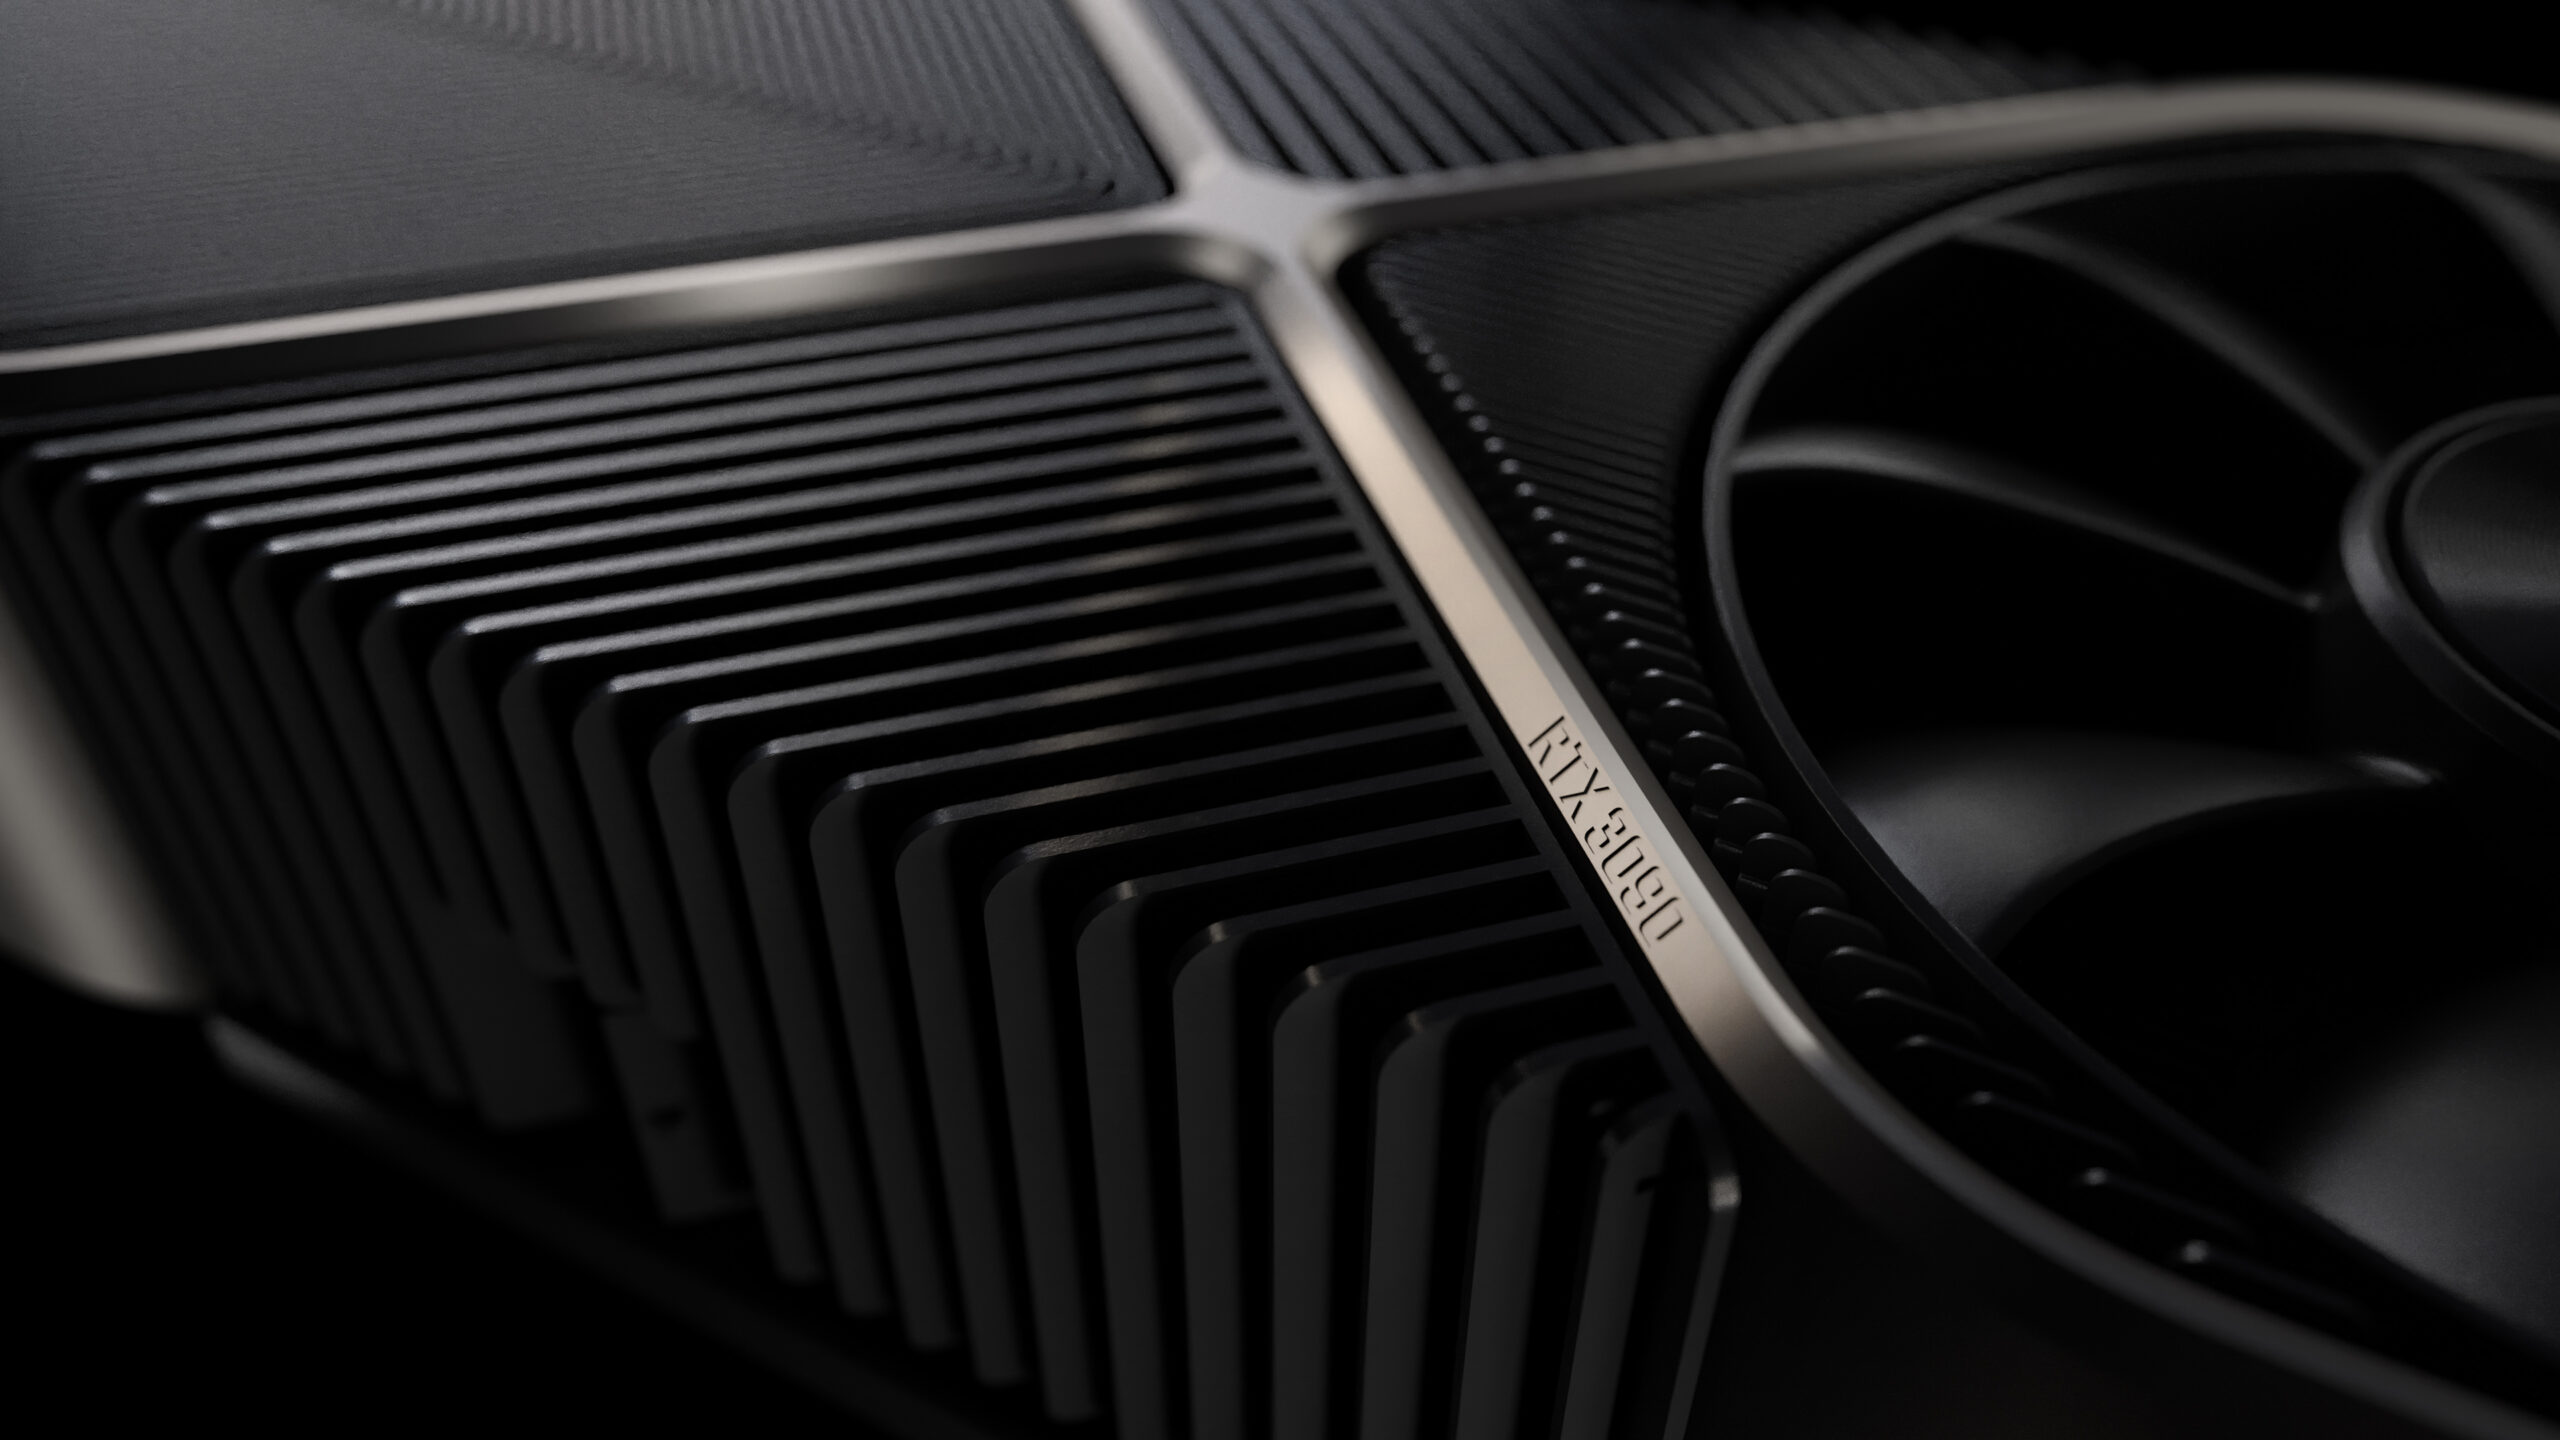 NVIDIA GeForce RTX 3080 Ti To Feature 12 GB Memory at 19 Gbps & Hash Rate Limiter To Tackle Crypto Miners